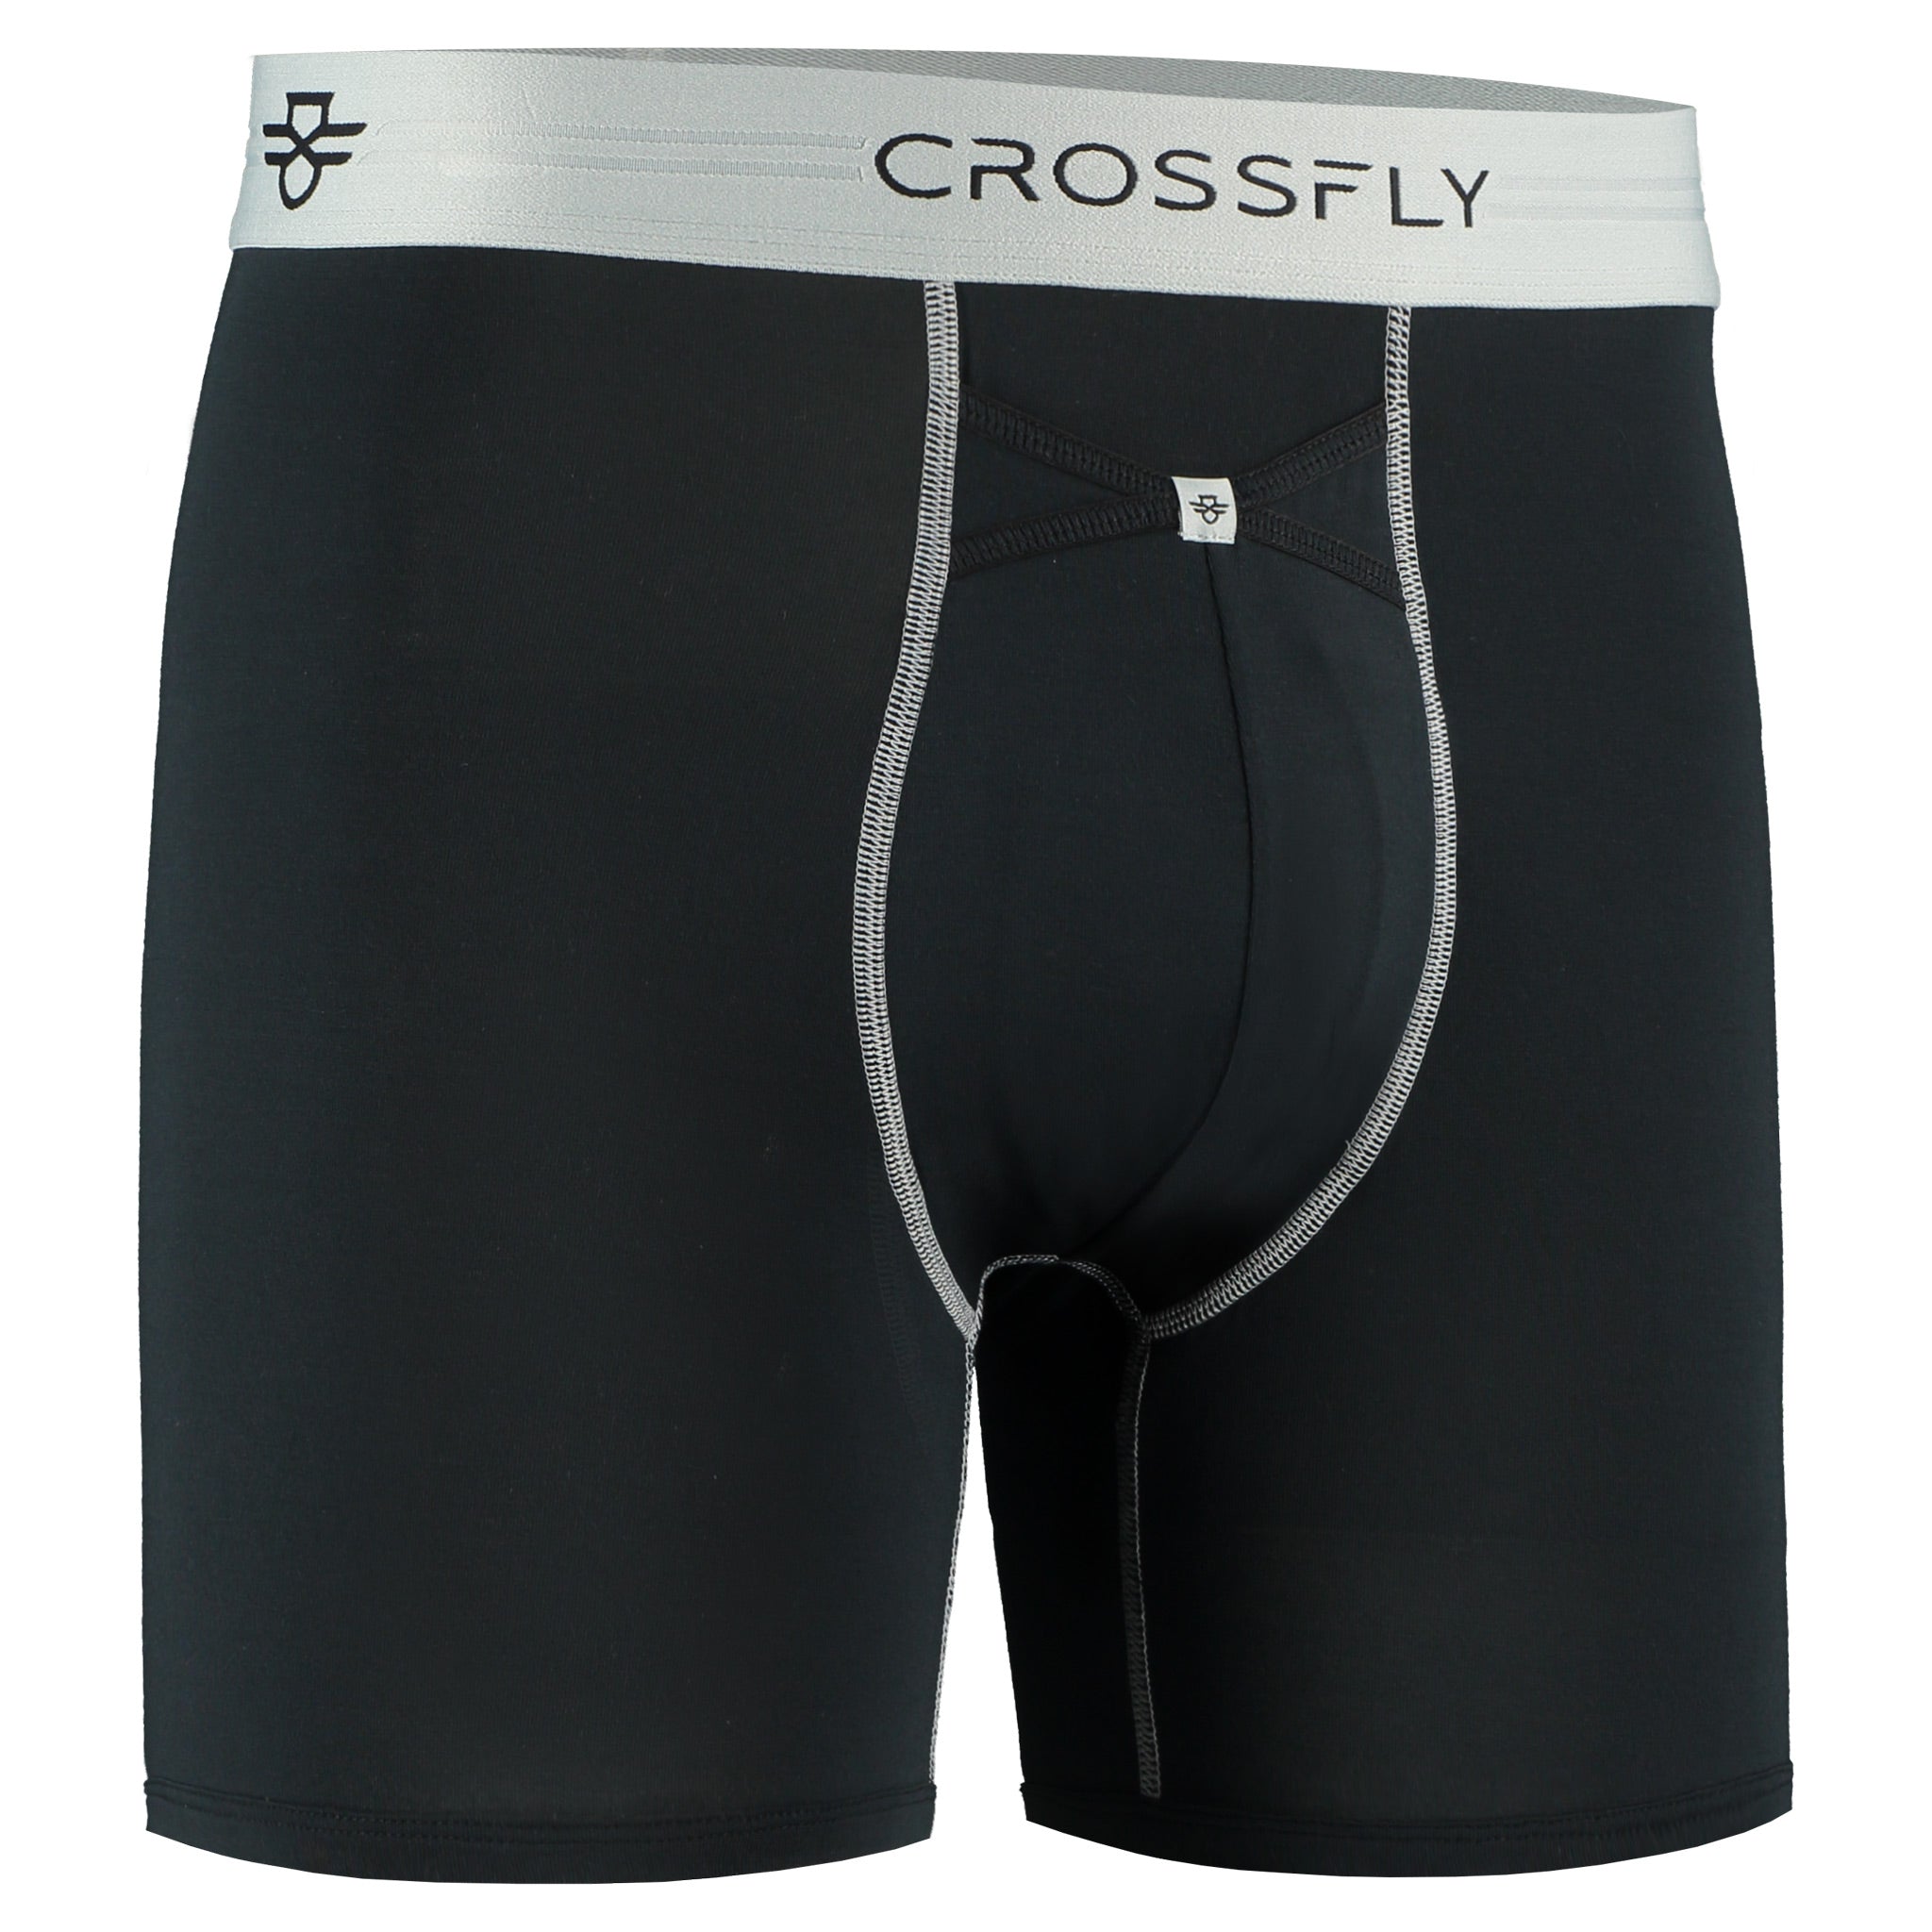 Everyday Cross Front Brief